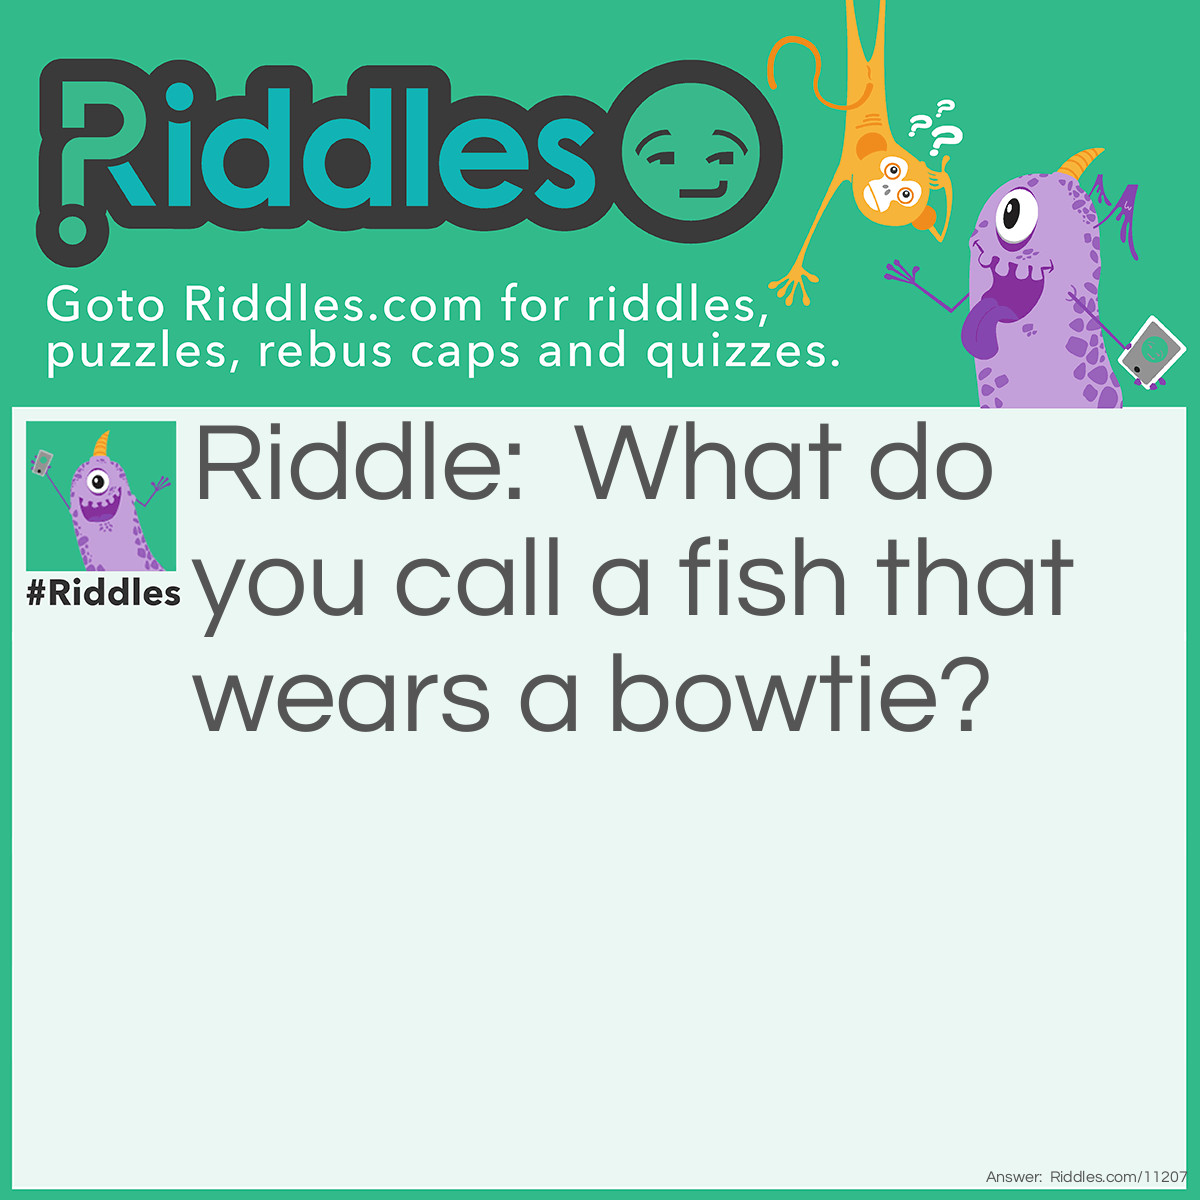 Riddle: What do you call a fish that wears a bowtie? Answer: You call it so-fish-ticated!